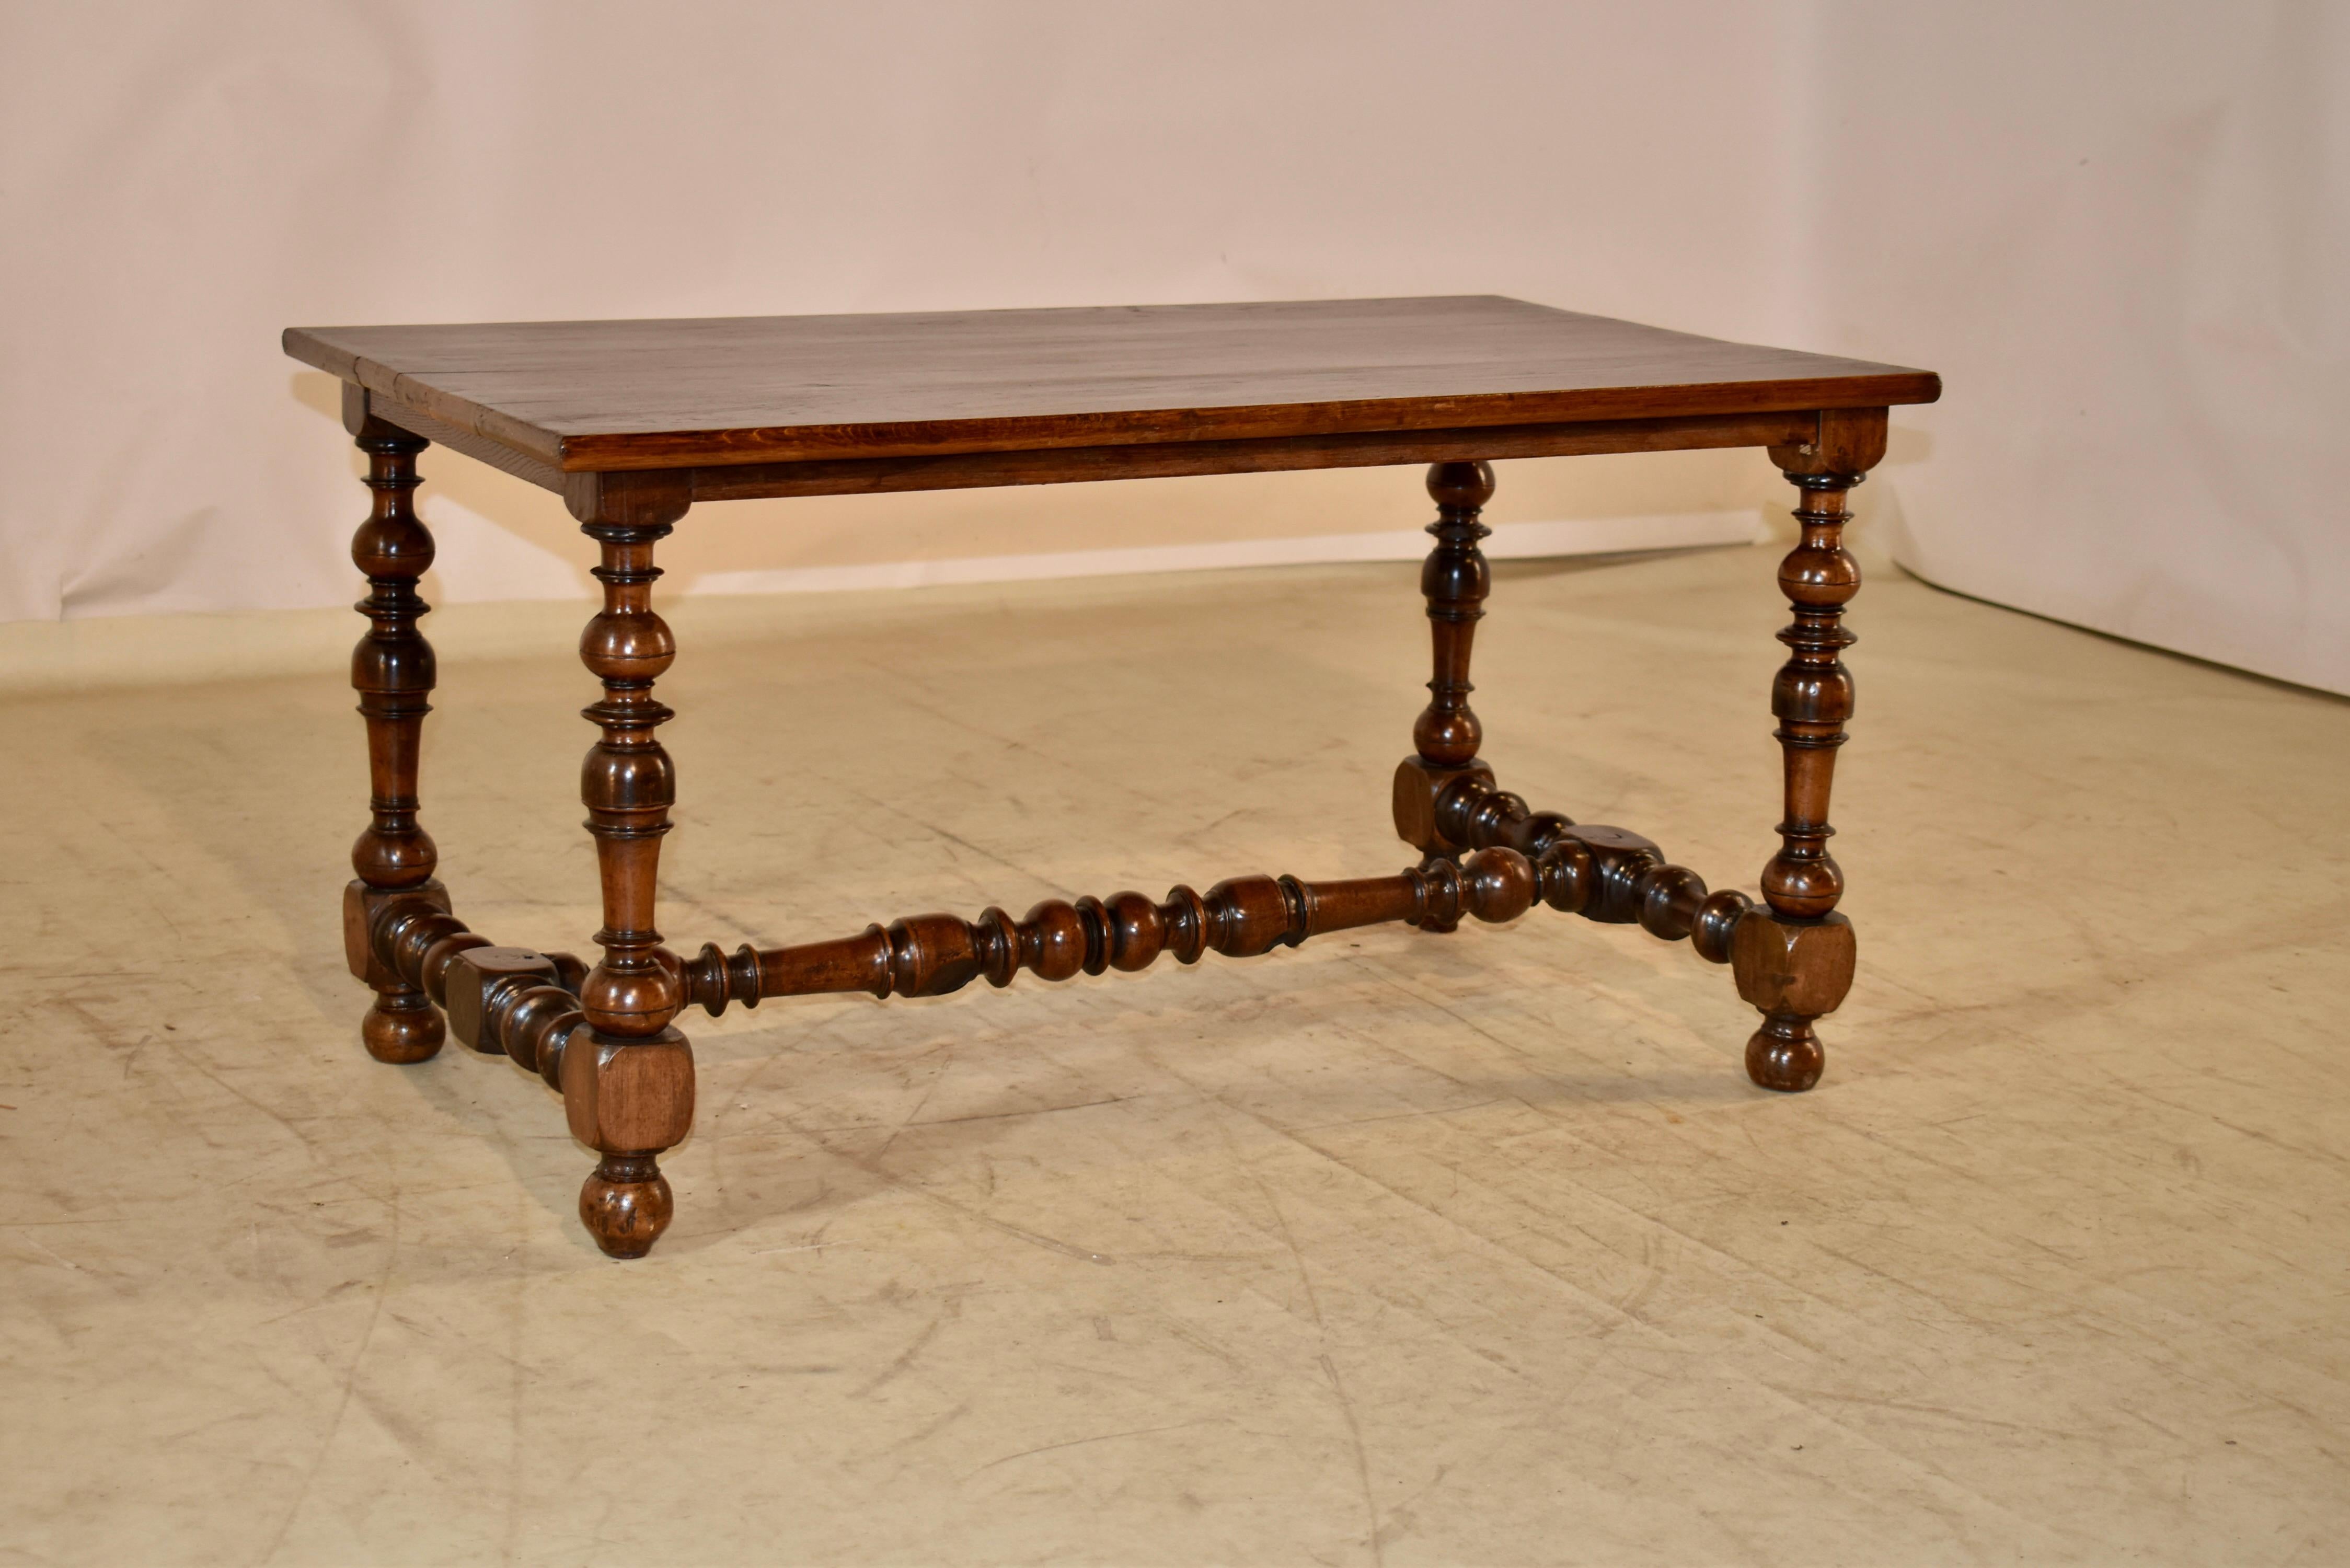 This is a lovely coffee table. The base is period Louis XV which dates from around 1750-1770, and is made from walnut. The top is a later addition, but added most likely in the 19th century, and is made from oak. The top has pretty graining tot he